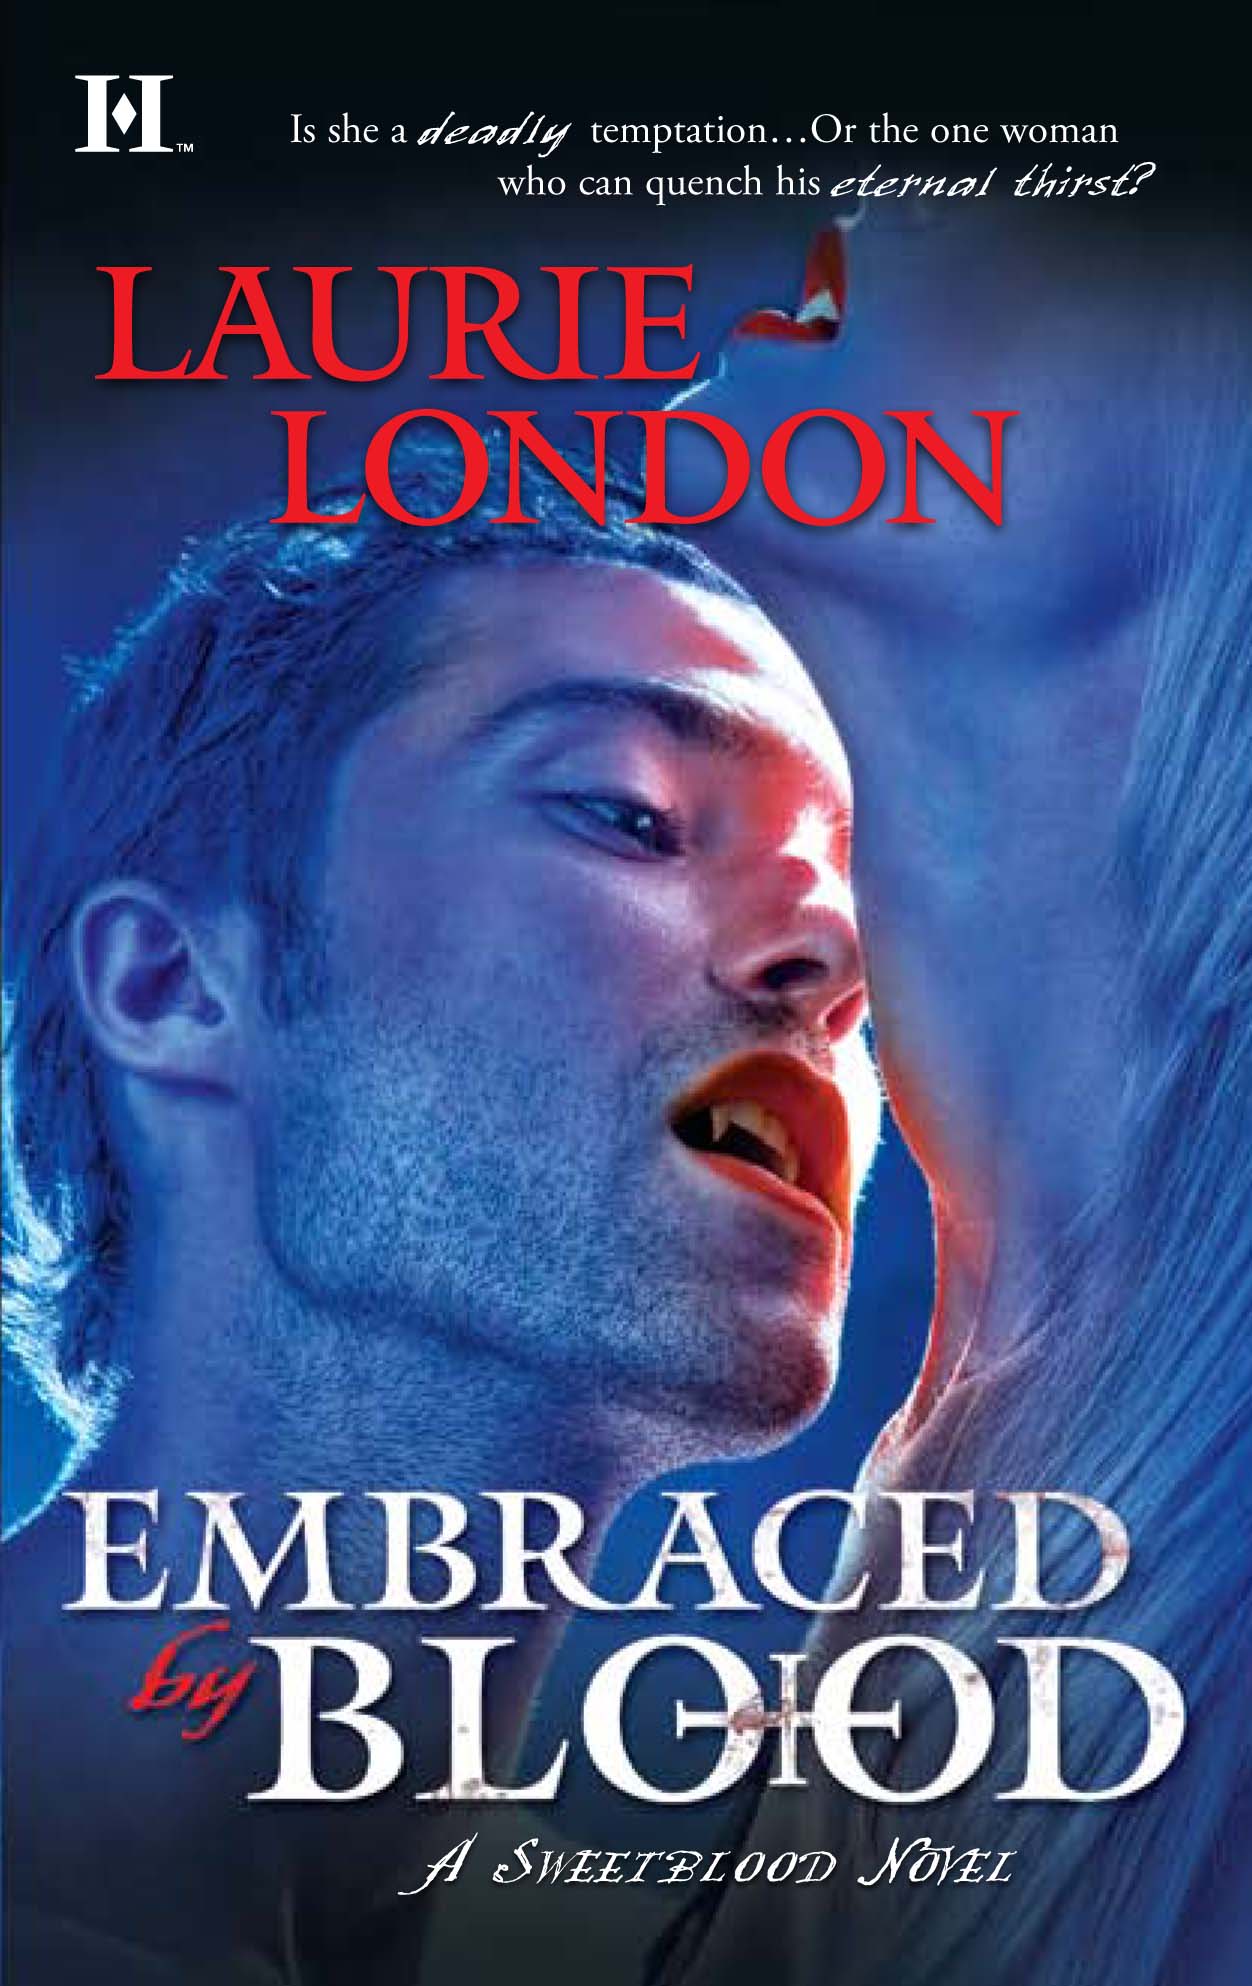 embraced by blood, vampire romance by laurie london